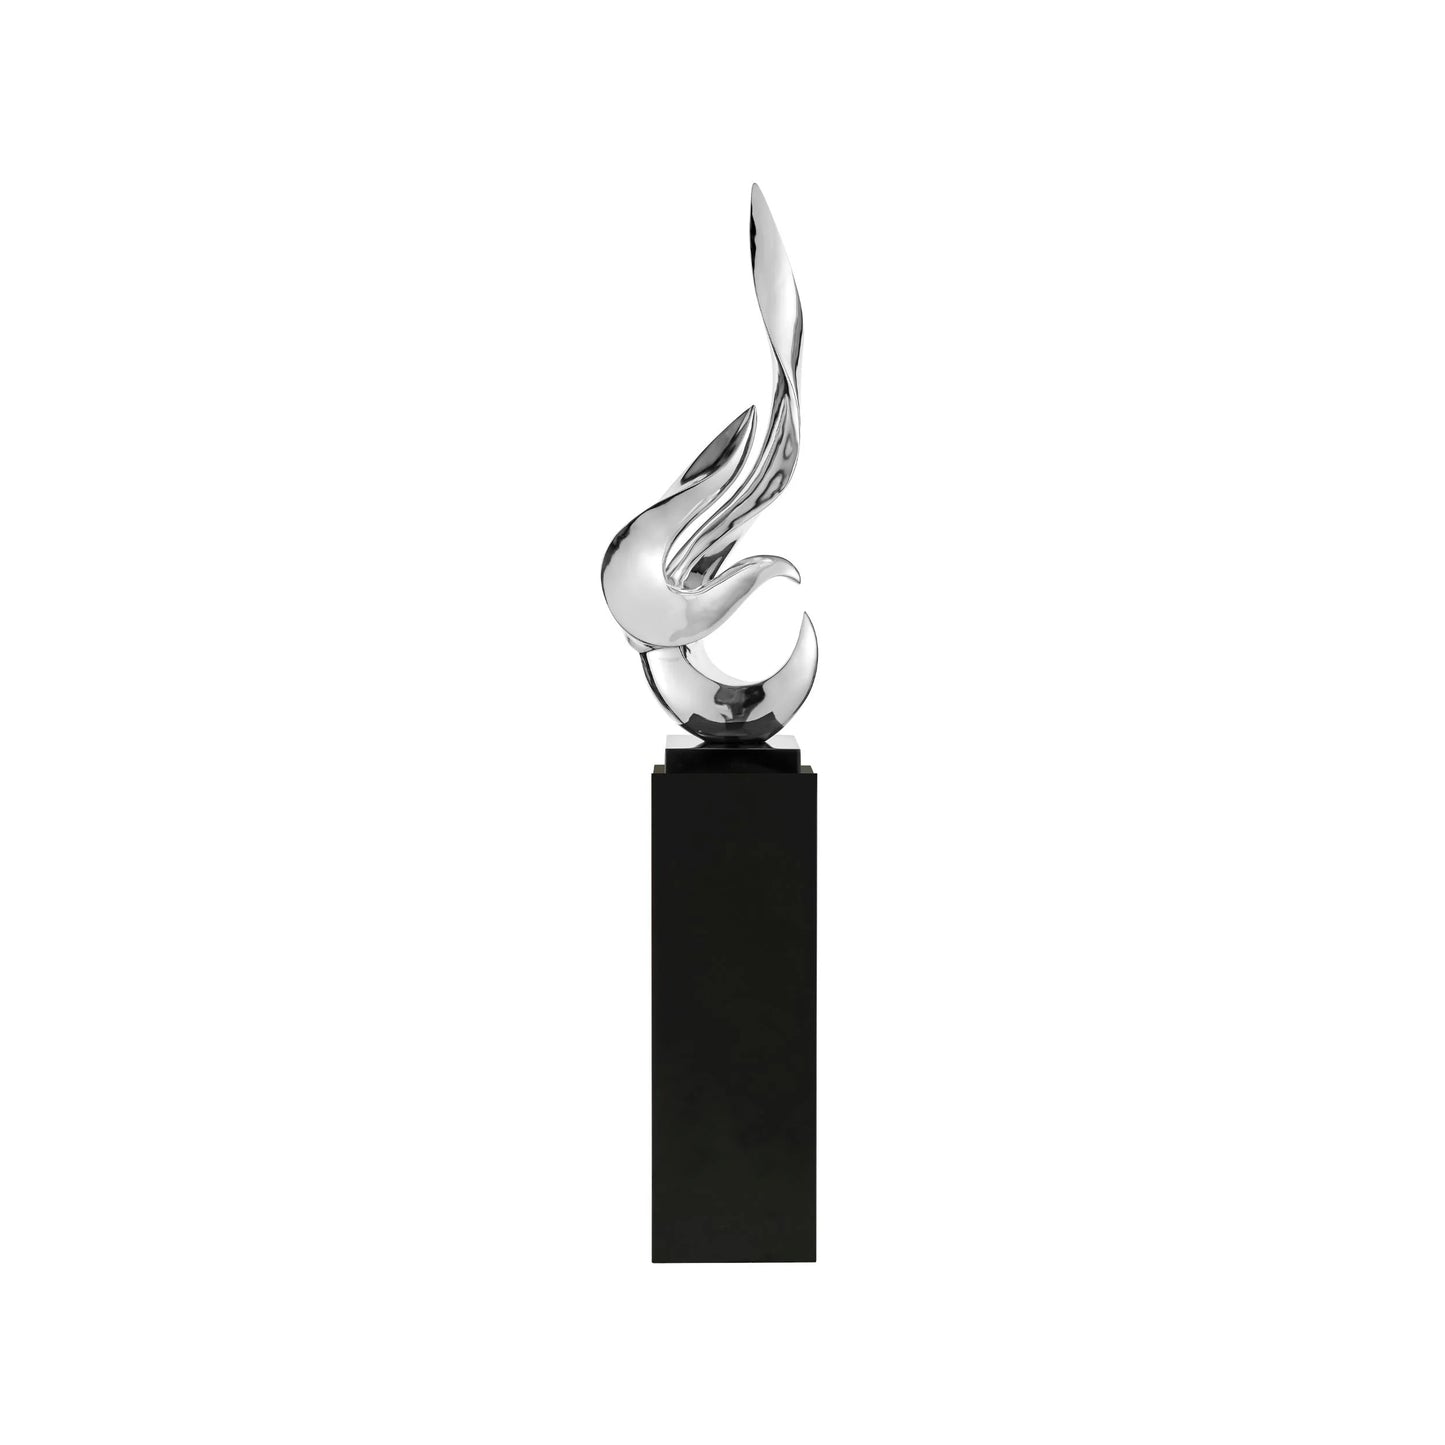 Finesse Decor Chrome Flame Floor Sculpture With Black Stand